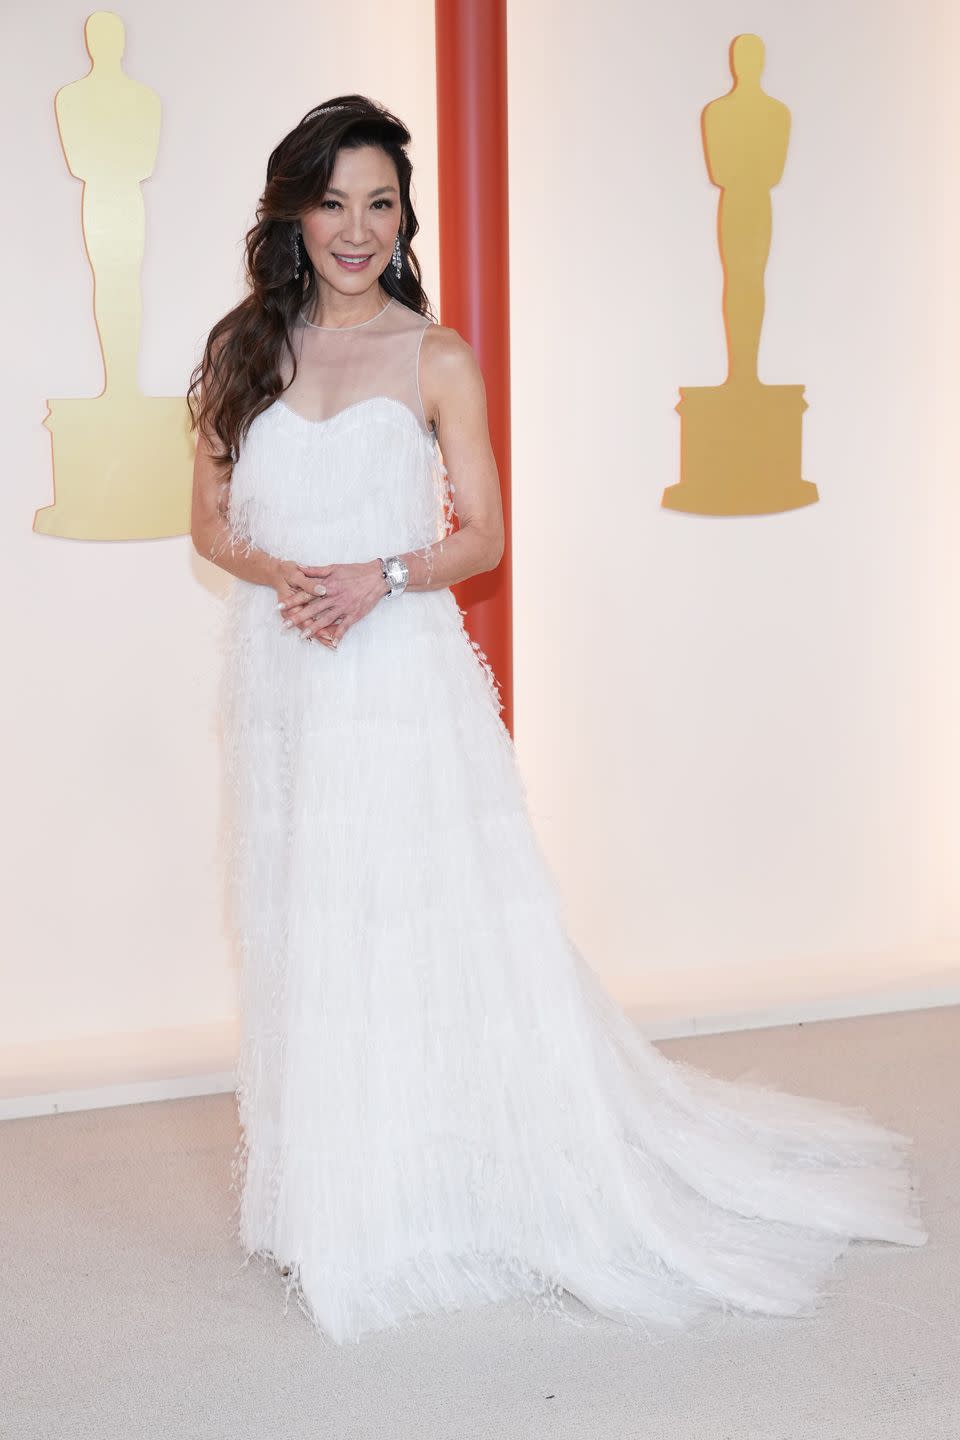 hollywood, california march 12 michelle yeoh attends the 95th annual academy awards on march 12, 2023 in hollywood, california photo by kevin mazurgetty images